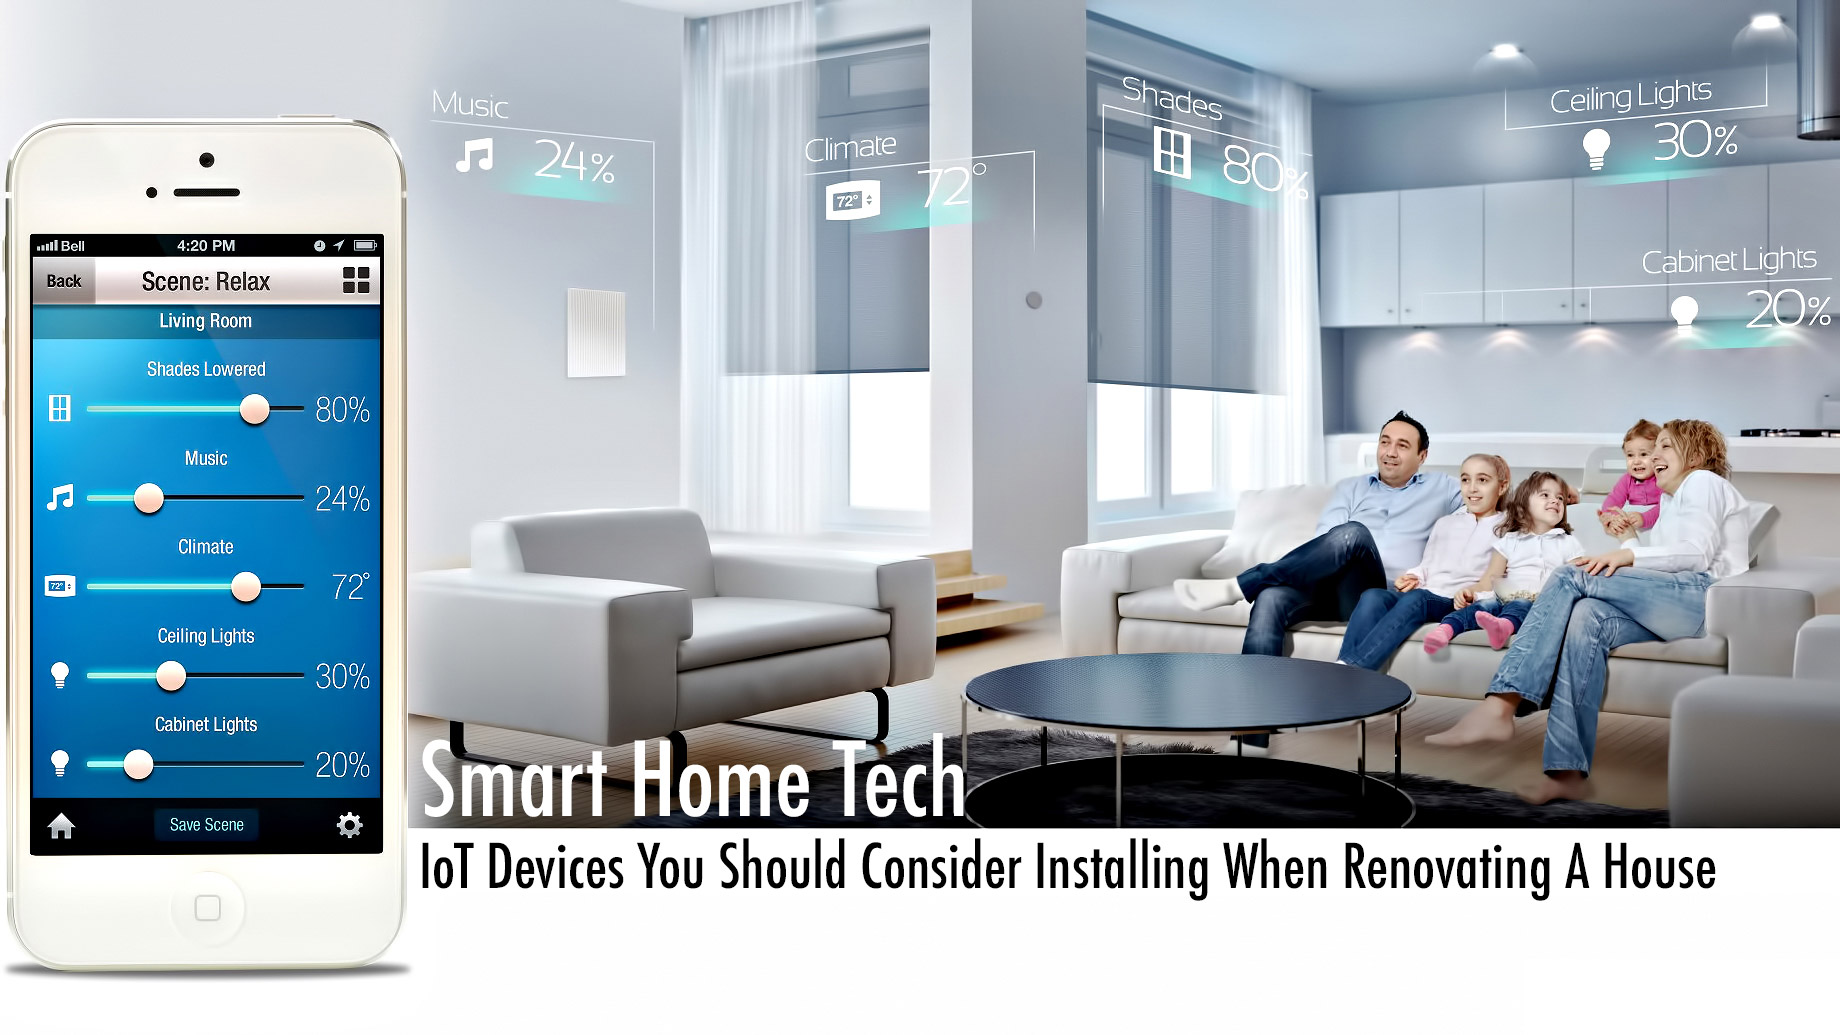 Smart Home Tech - IoT Devices You Should Consider Installing When Renovating A House